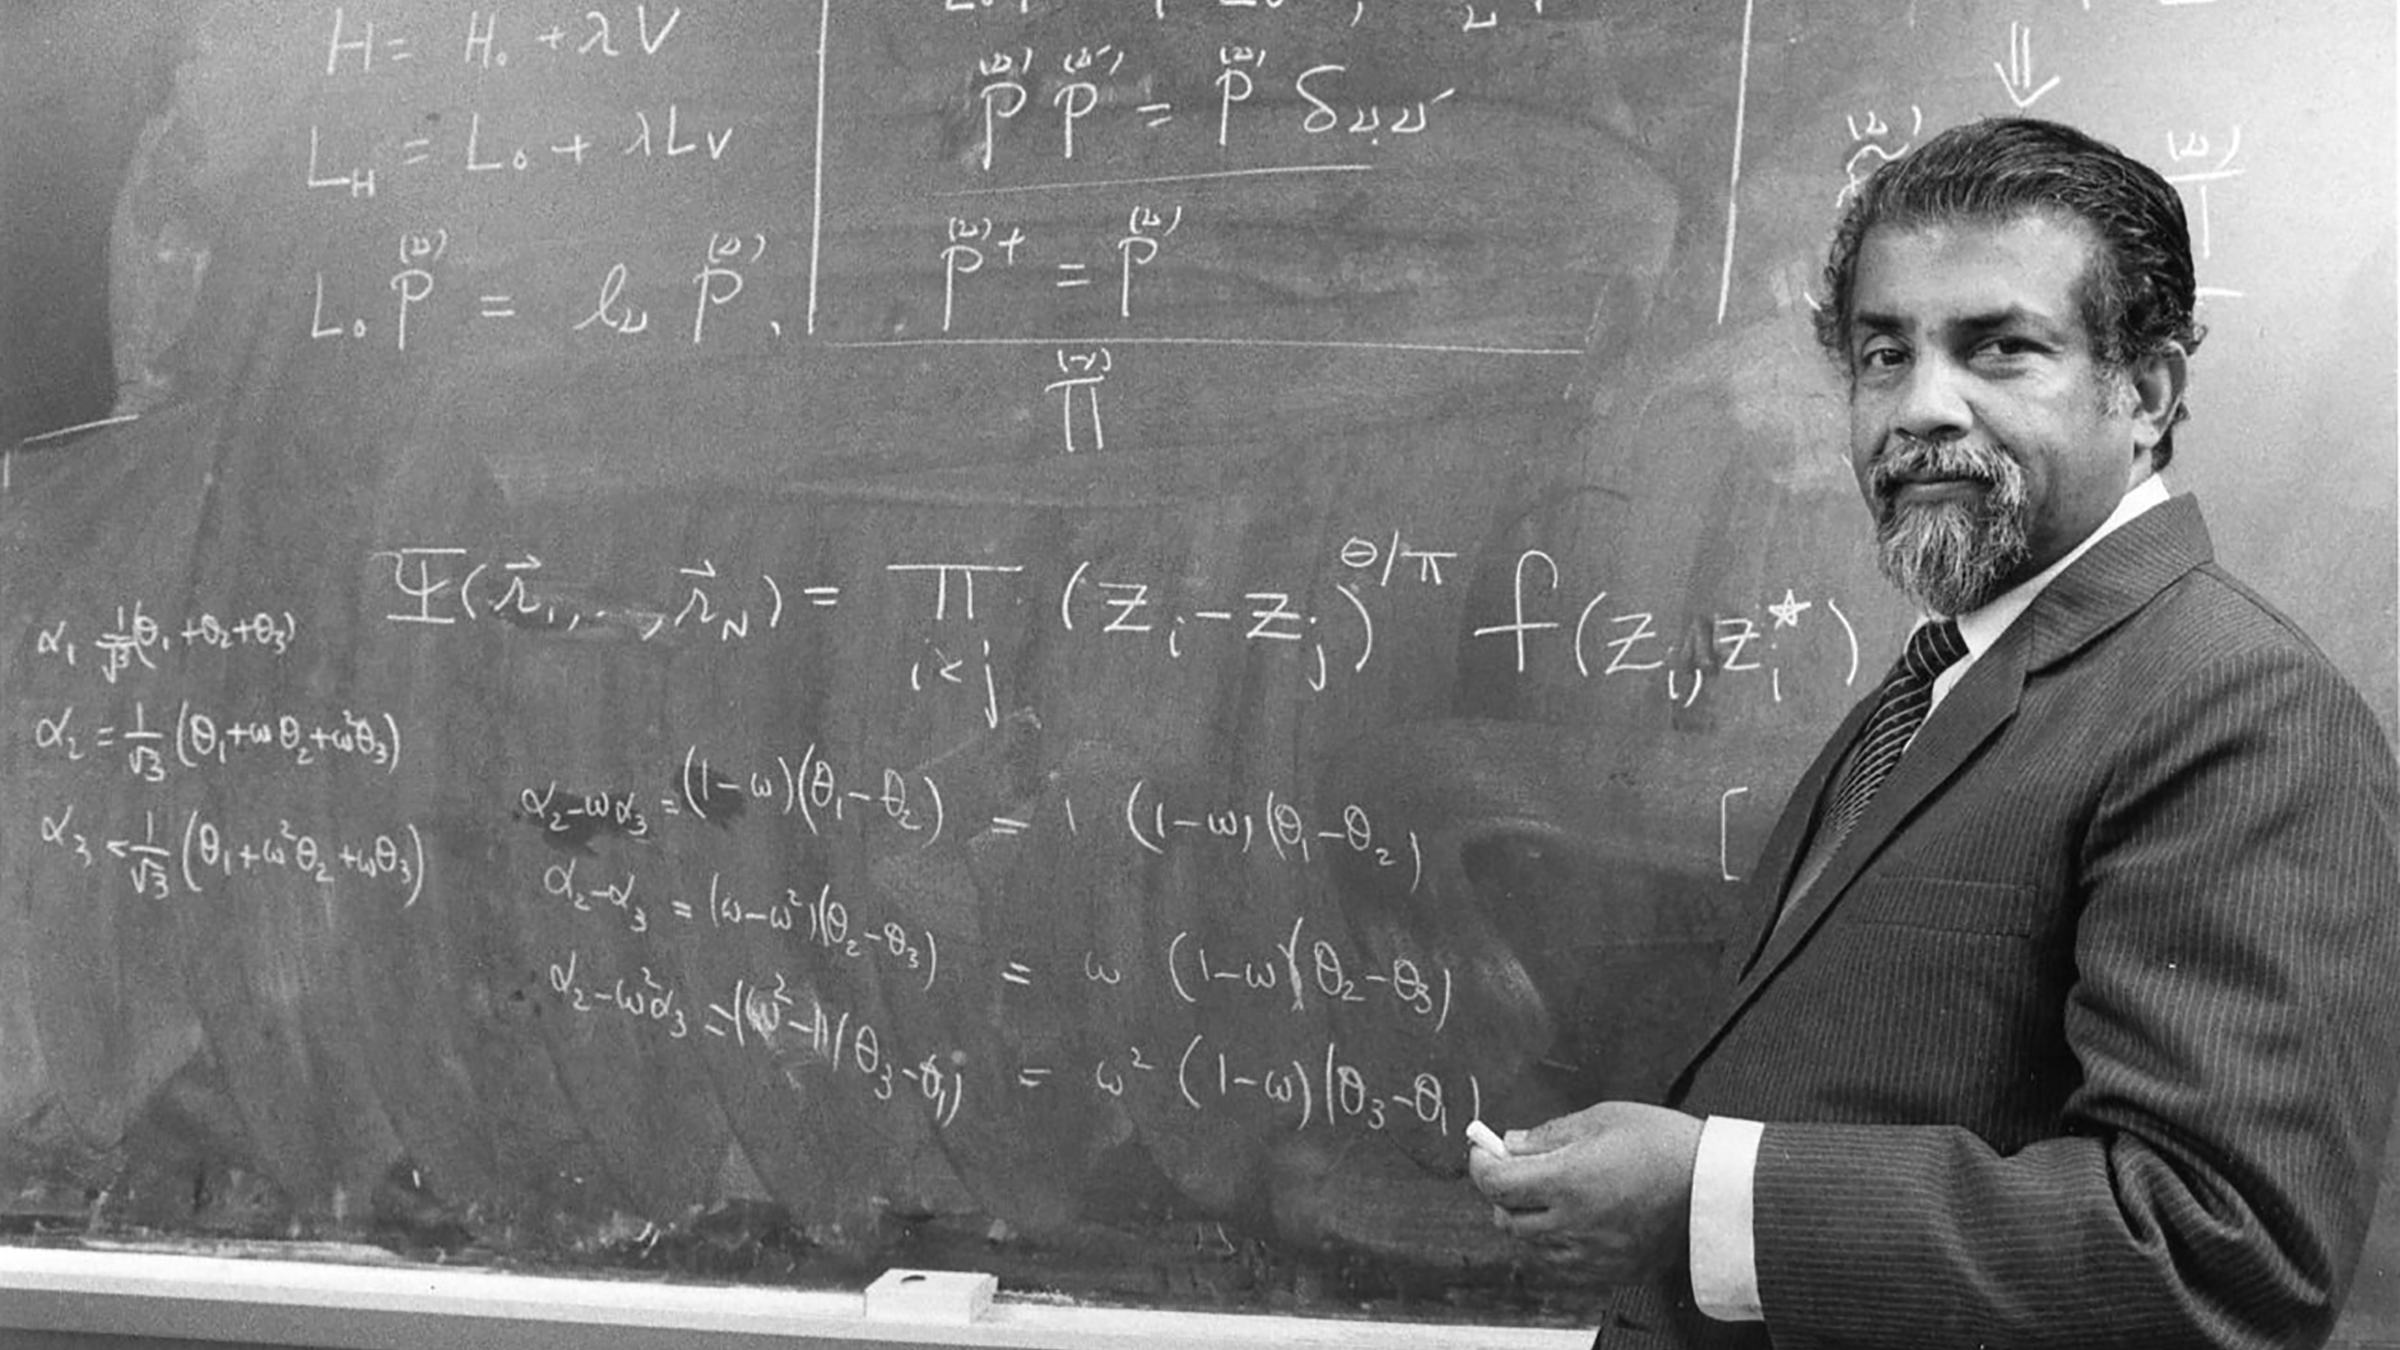 A man in a suit stands at a chalkboard bearing mathematical notation